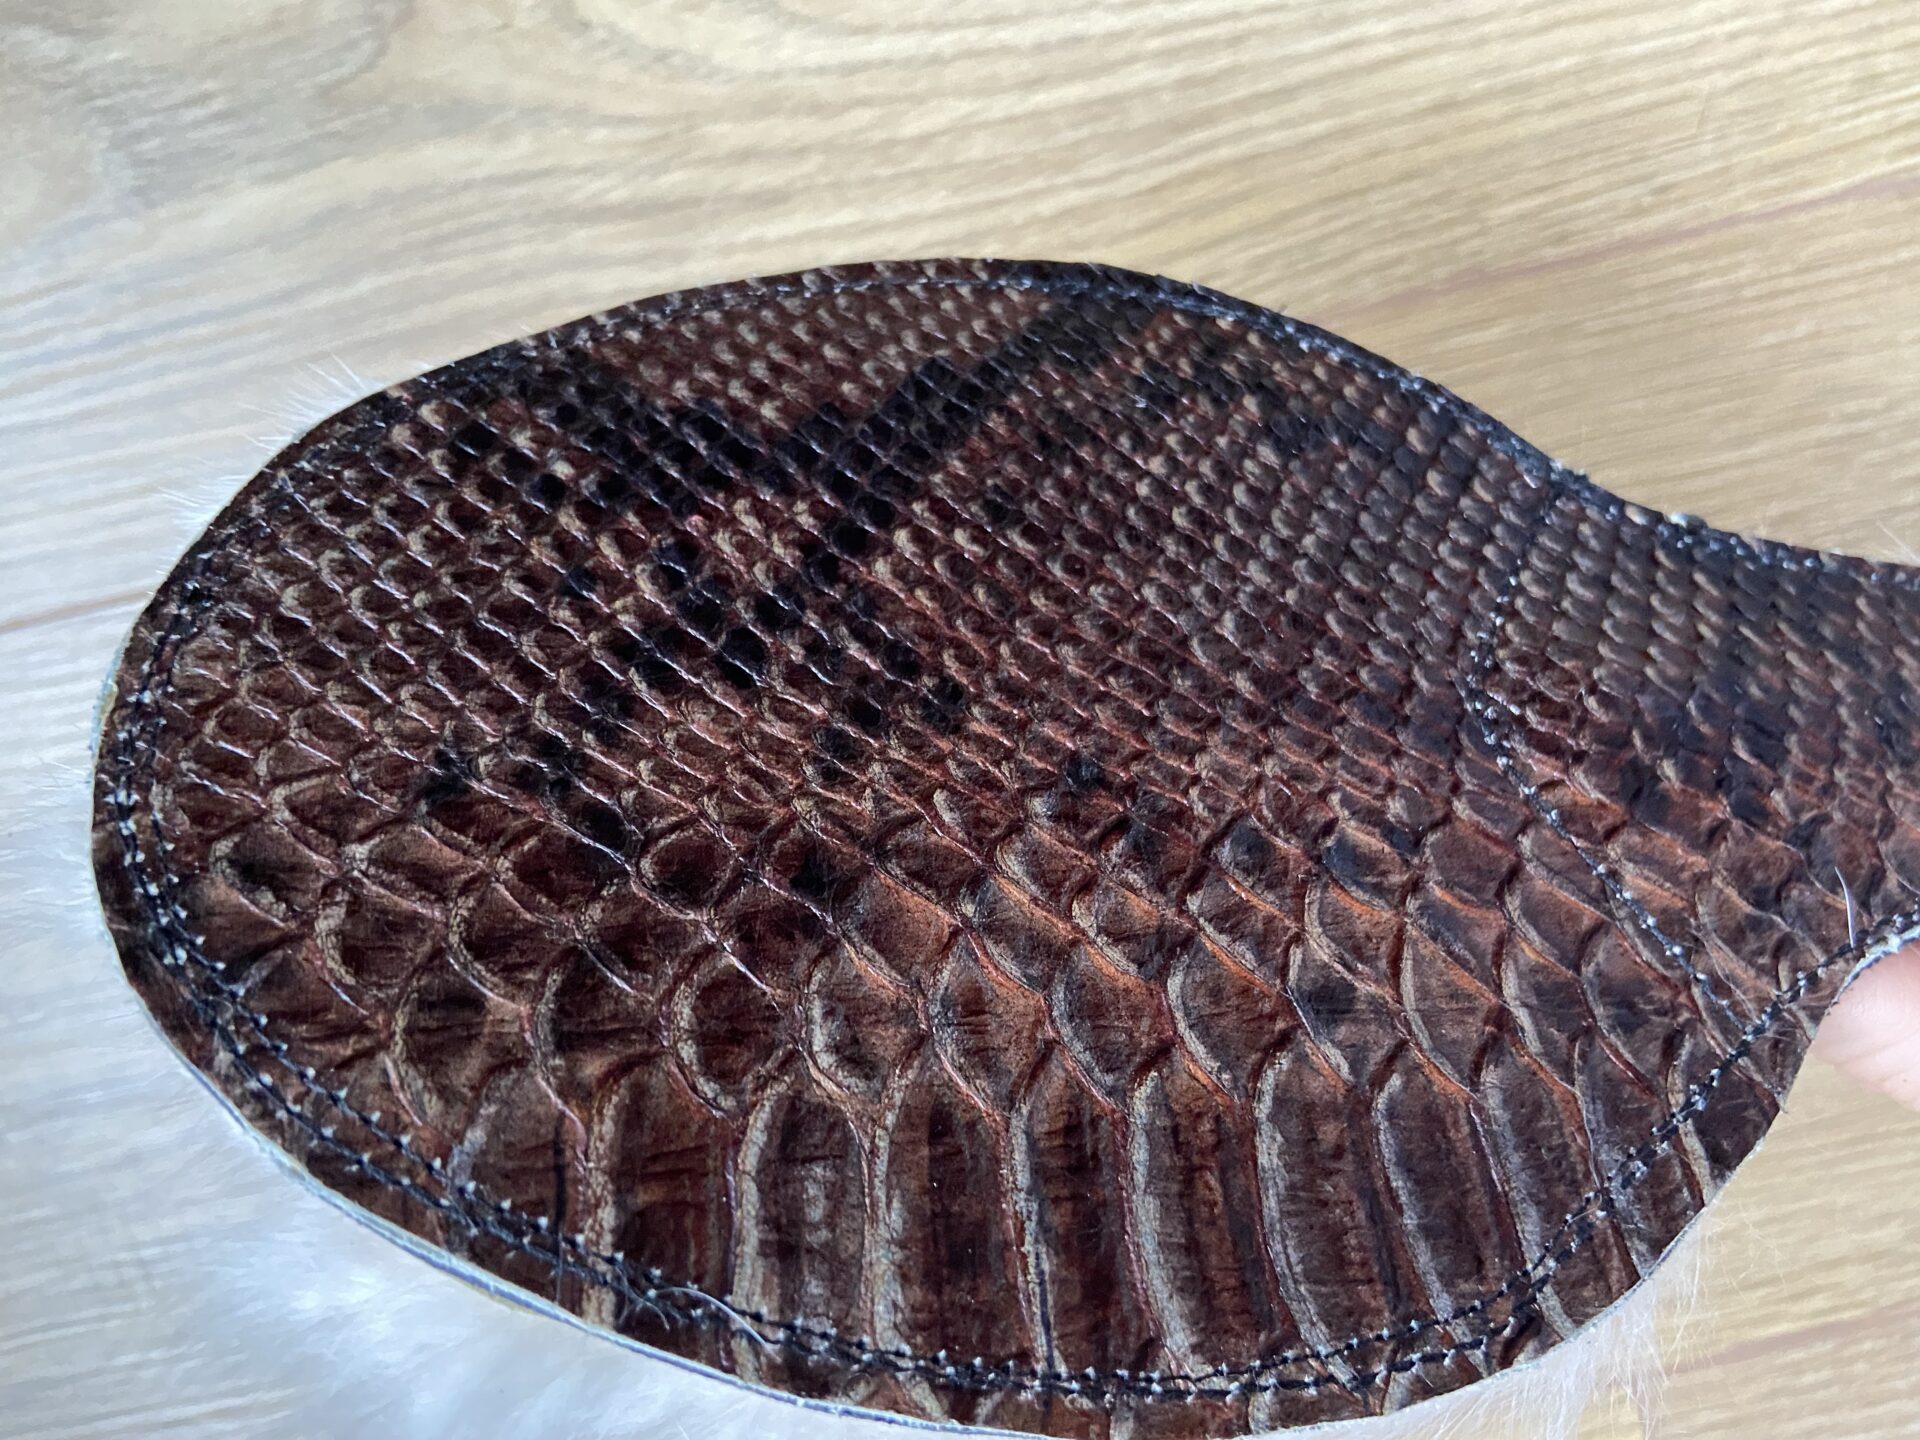 Fur and snakeprint round paddle